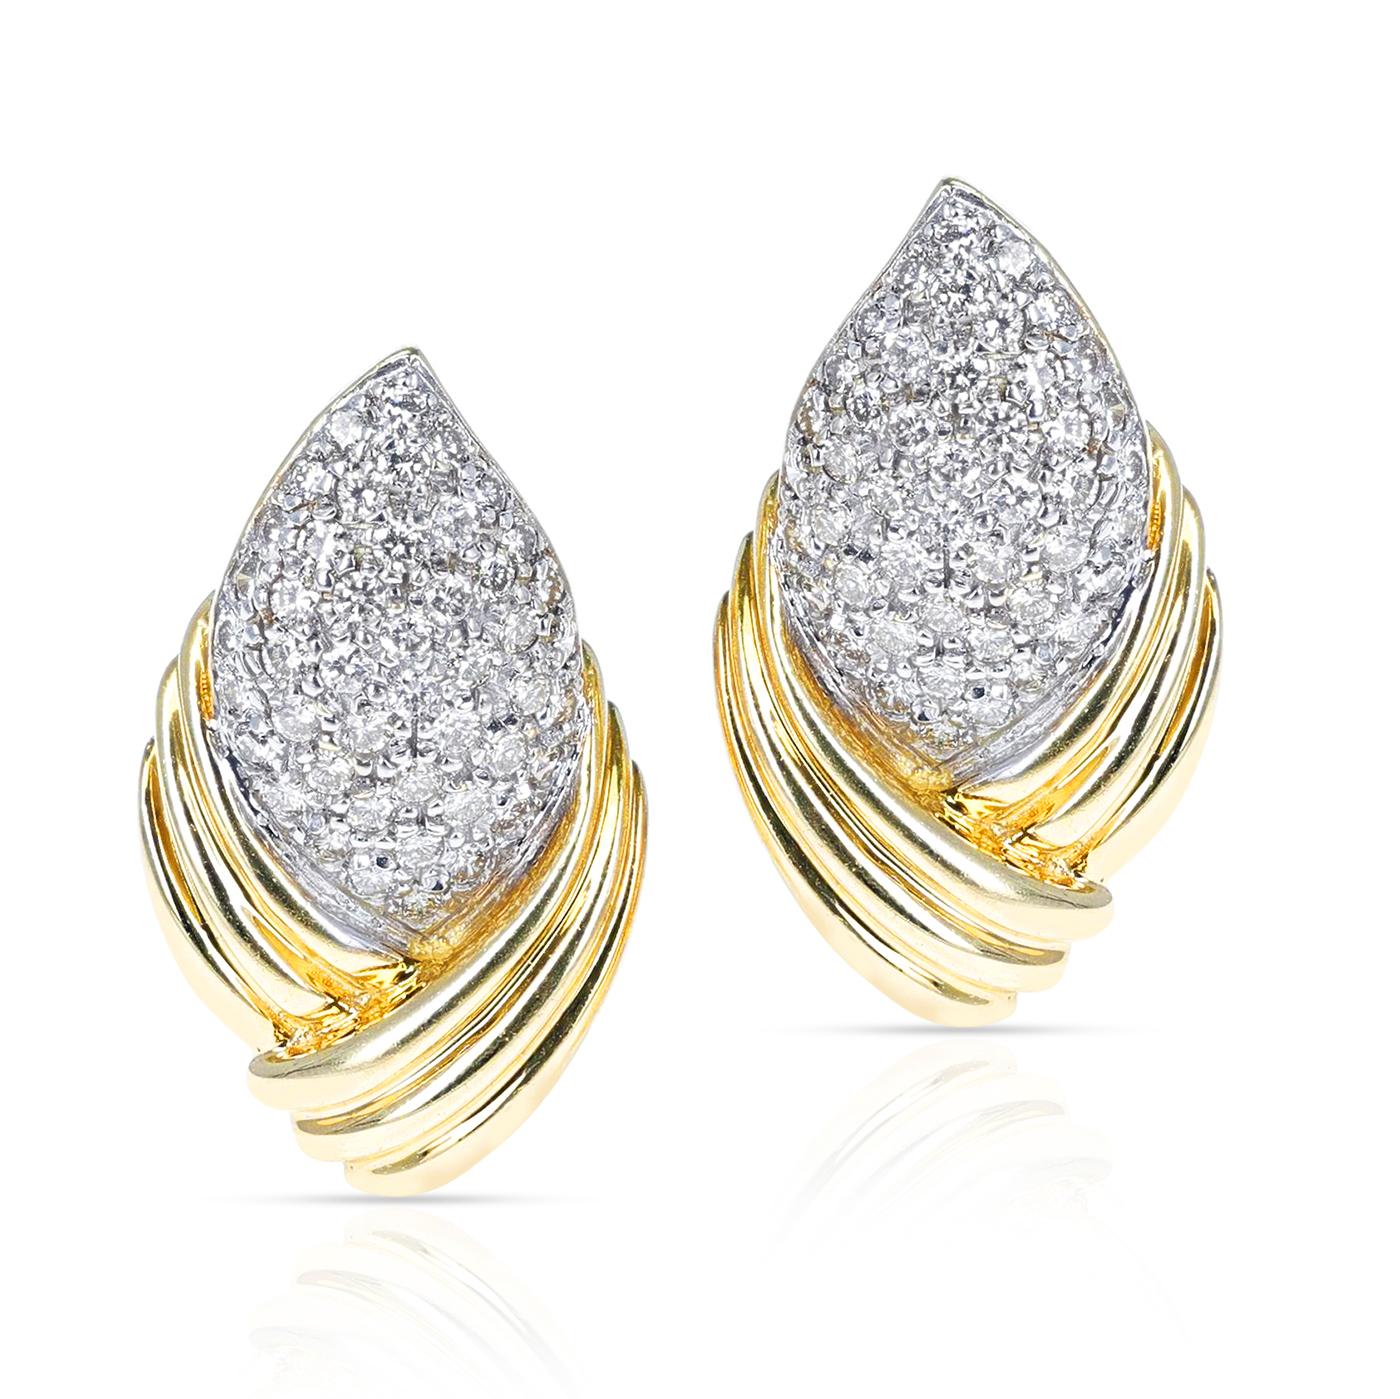 Leaf-Style Diamond Cocktail Earrings, 18K Yellow Gold In Excellent Condition For Sale In New York, NY